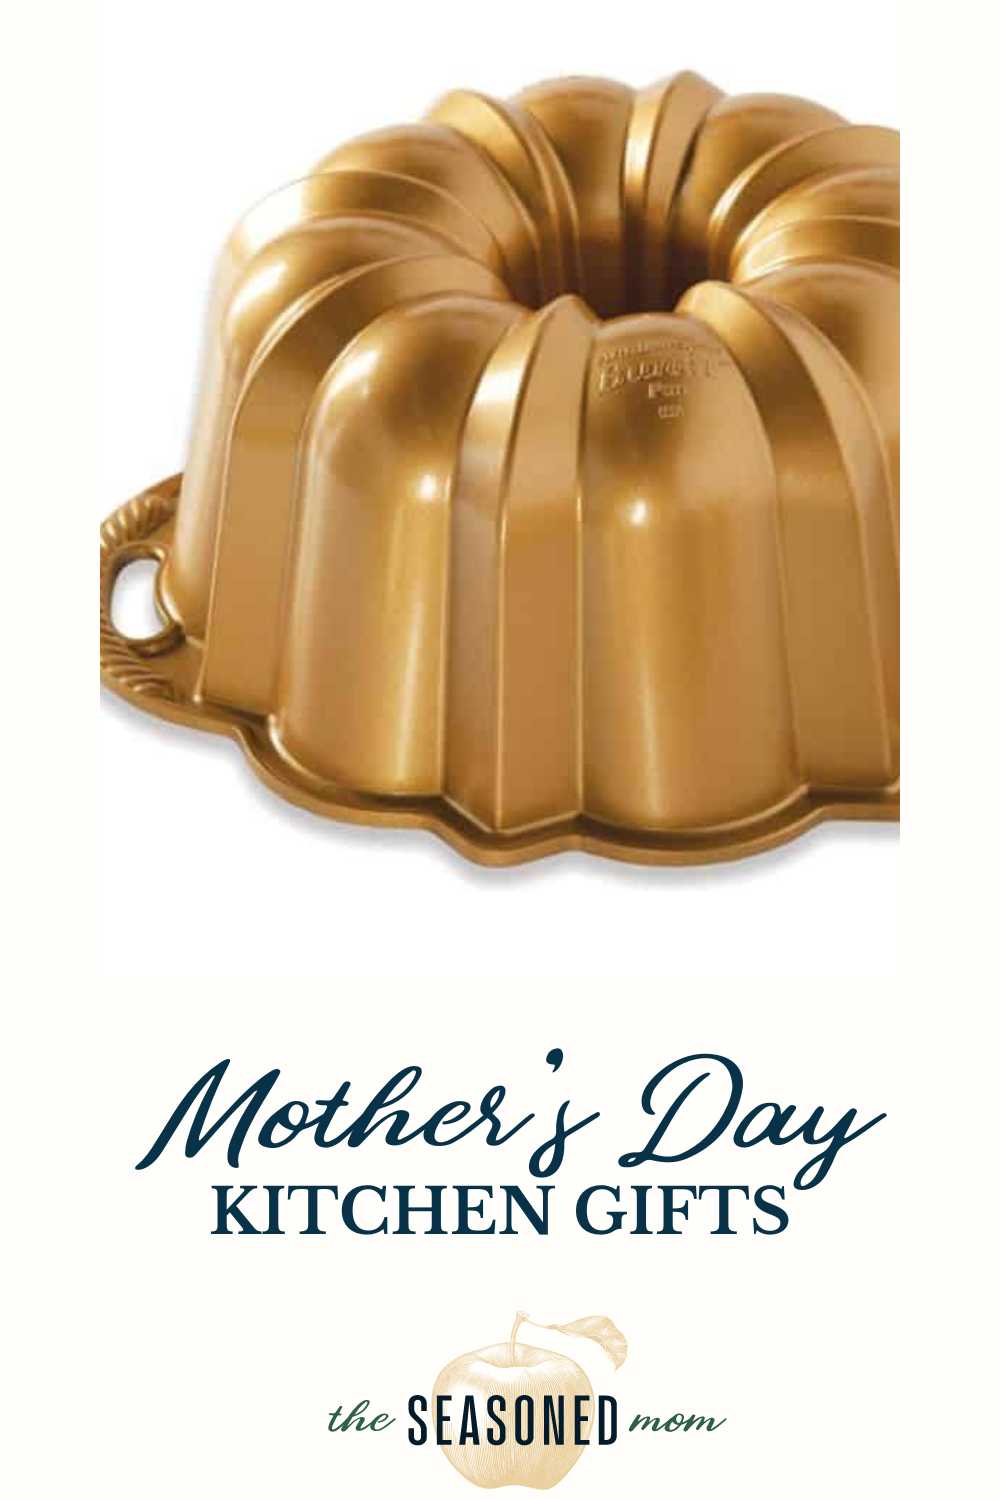 Kitchen Gifts For Mothers Day Pin 4 